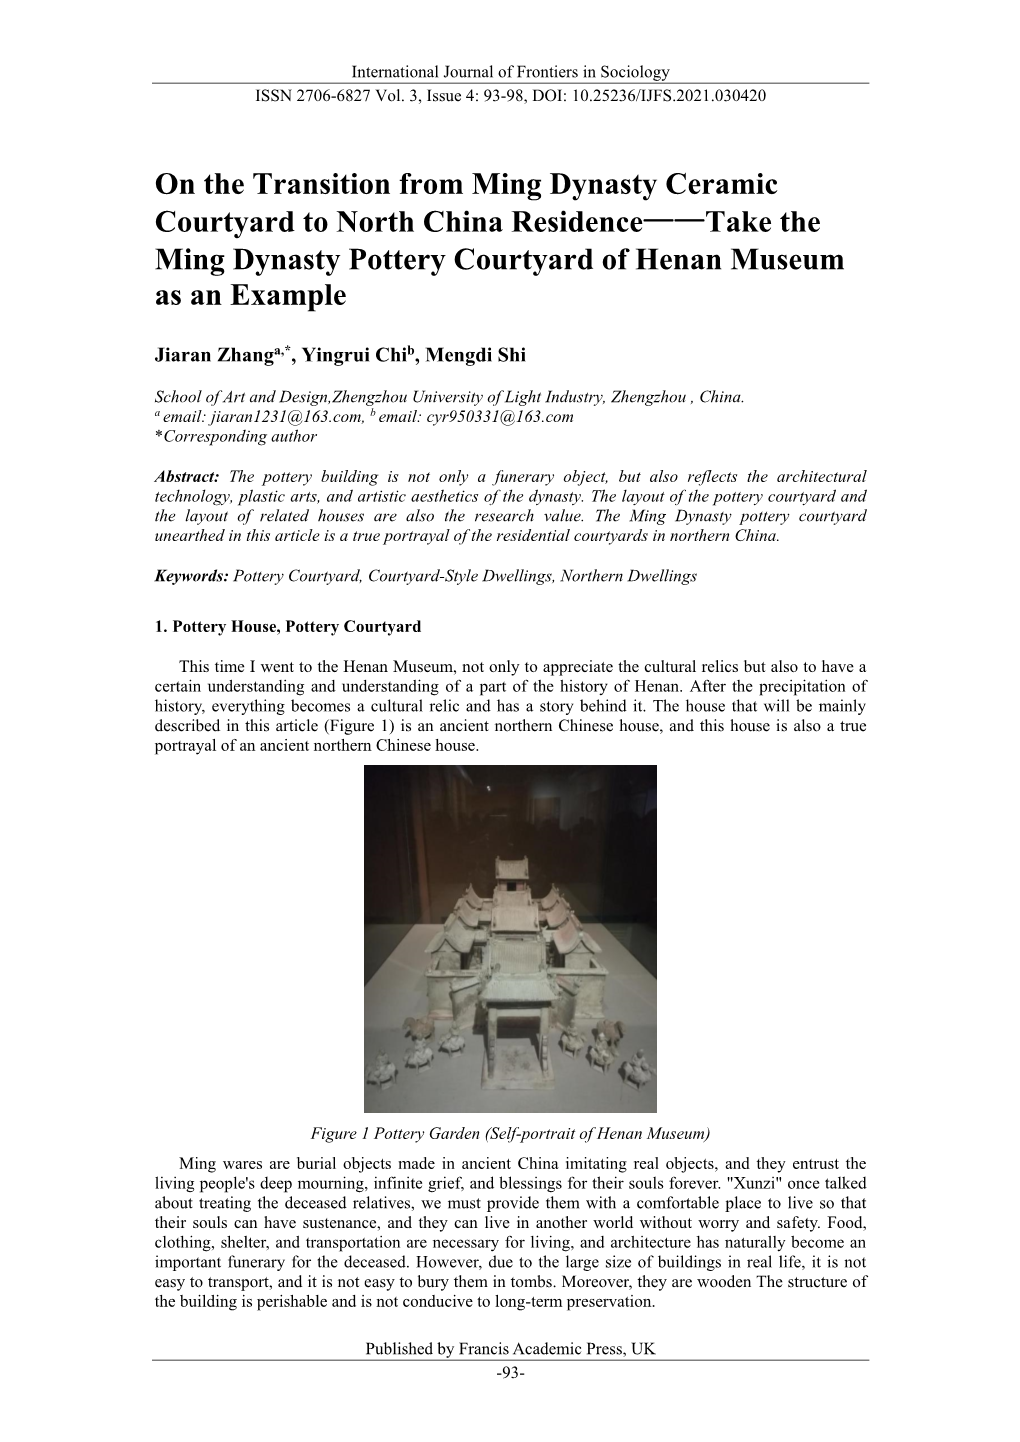 Take the Ming Dynasty Pottery Courtyard of Henan Museum As an Example